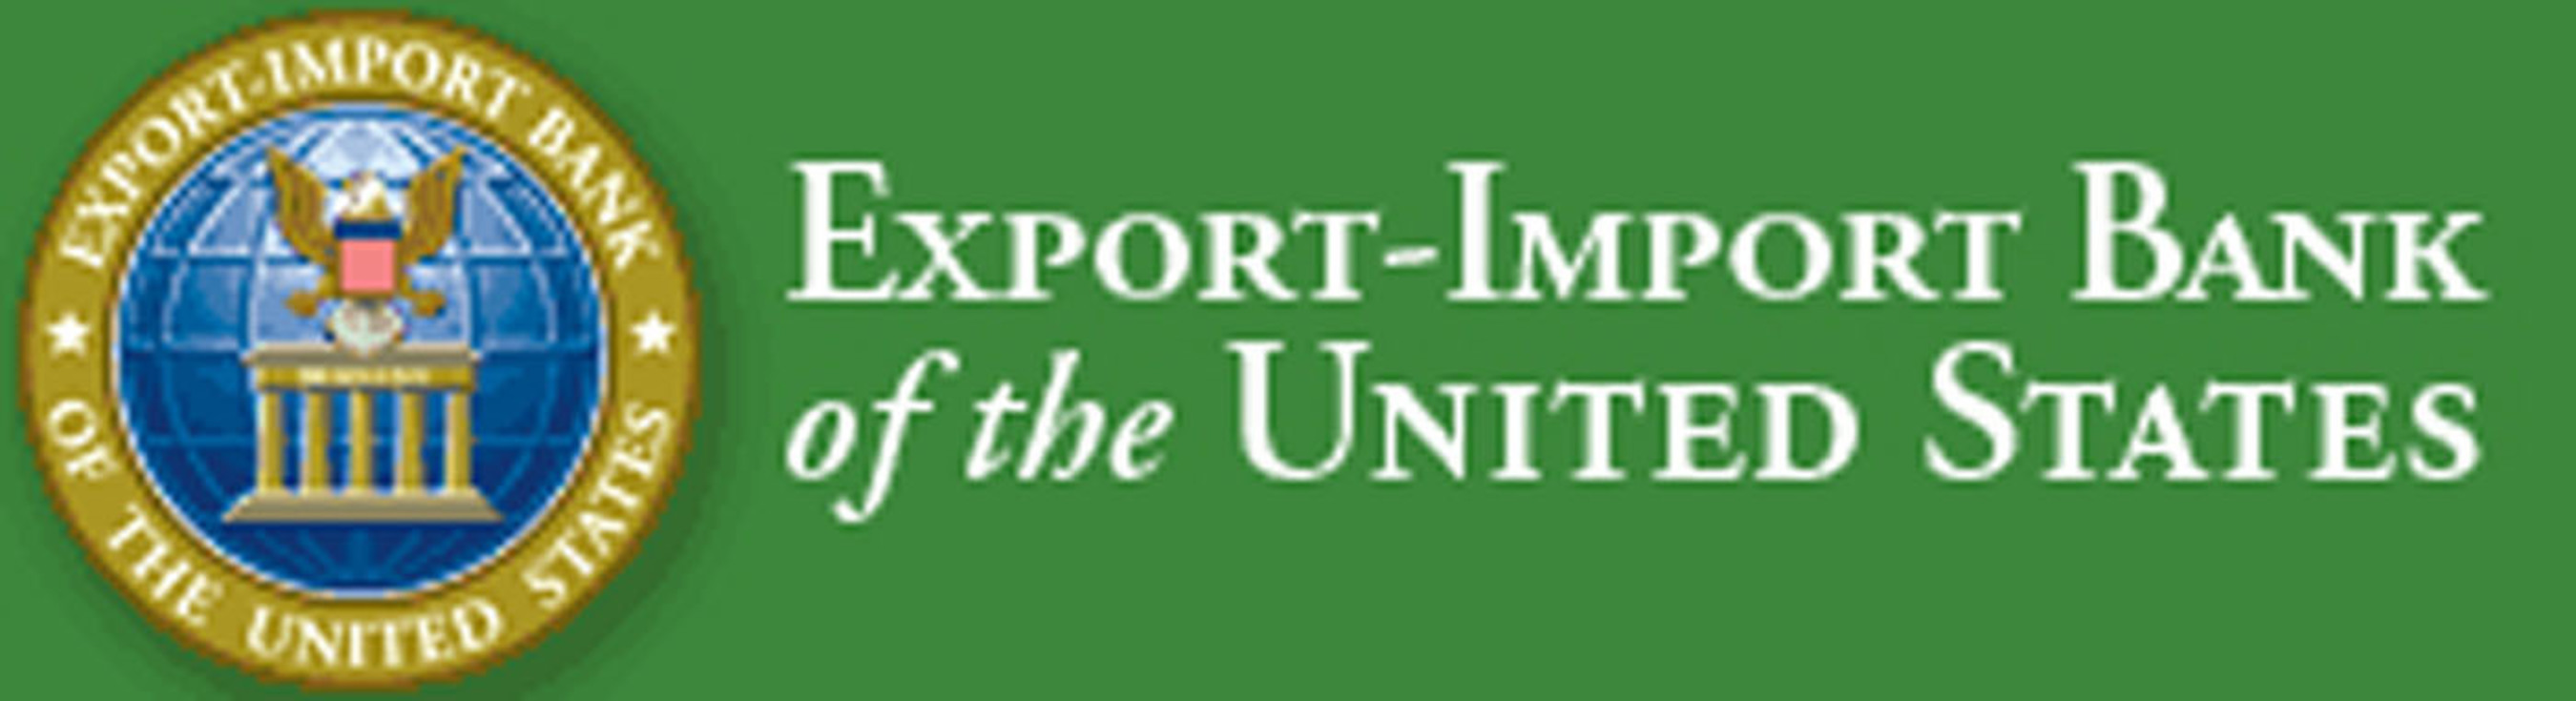 Export-Import Bank of the United States.